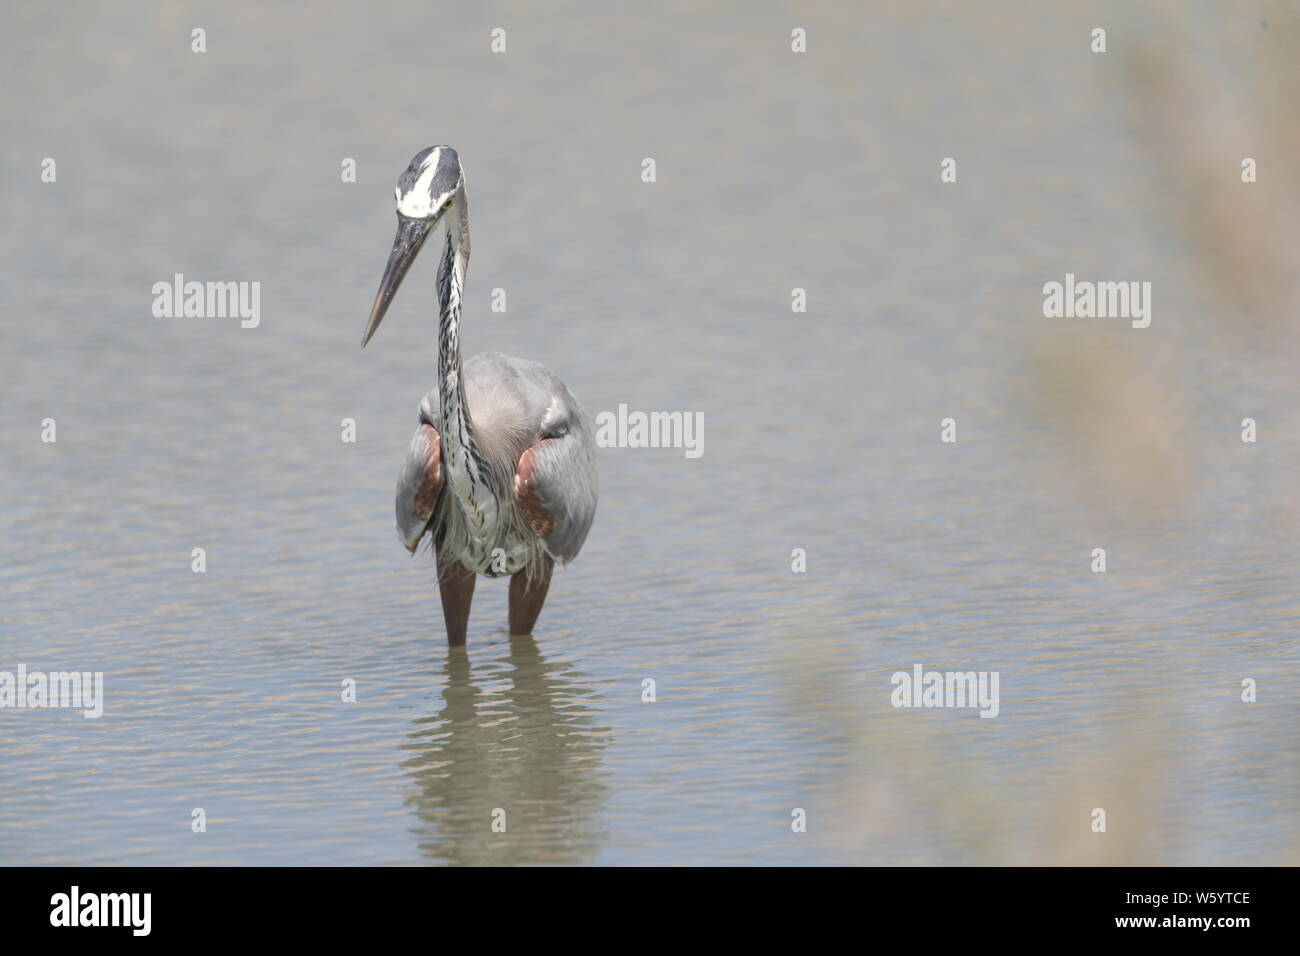 A bird called Gray Heron, Ardea cinerea, searches for food in the salt water from the sea towards the Kino Viejo estuary. The gray heron or air—n is a species of bird of the Ardeidae family of Eurasia and Africa, a slender and large aquatic bird with long neck and legs, with mainly gray plumage. It inhabits rivers, lakes and all kinds of freshwater and brackish wetlands. (Photo: Luis Gutierrez / NortePhoto)  Un ave llamada Garza gris, Ardea cinerea,  busca alimento en el agua salada proveniente del mar hacia el estero de Kino Viejo.  La garza real ? o air—n? es una especie de ave pelecaniforme Stock Photo